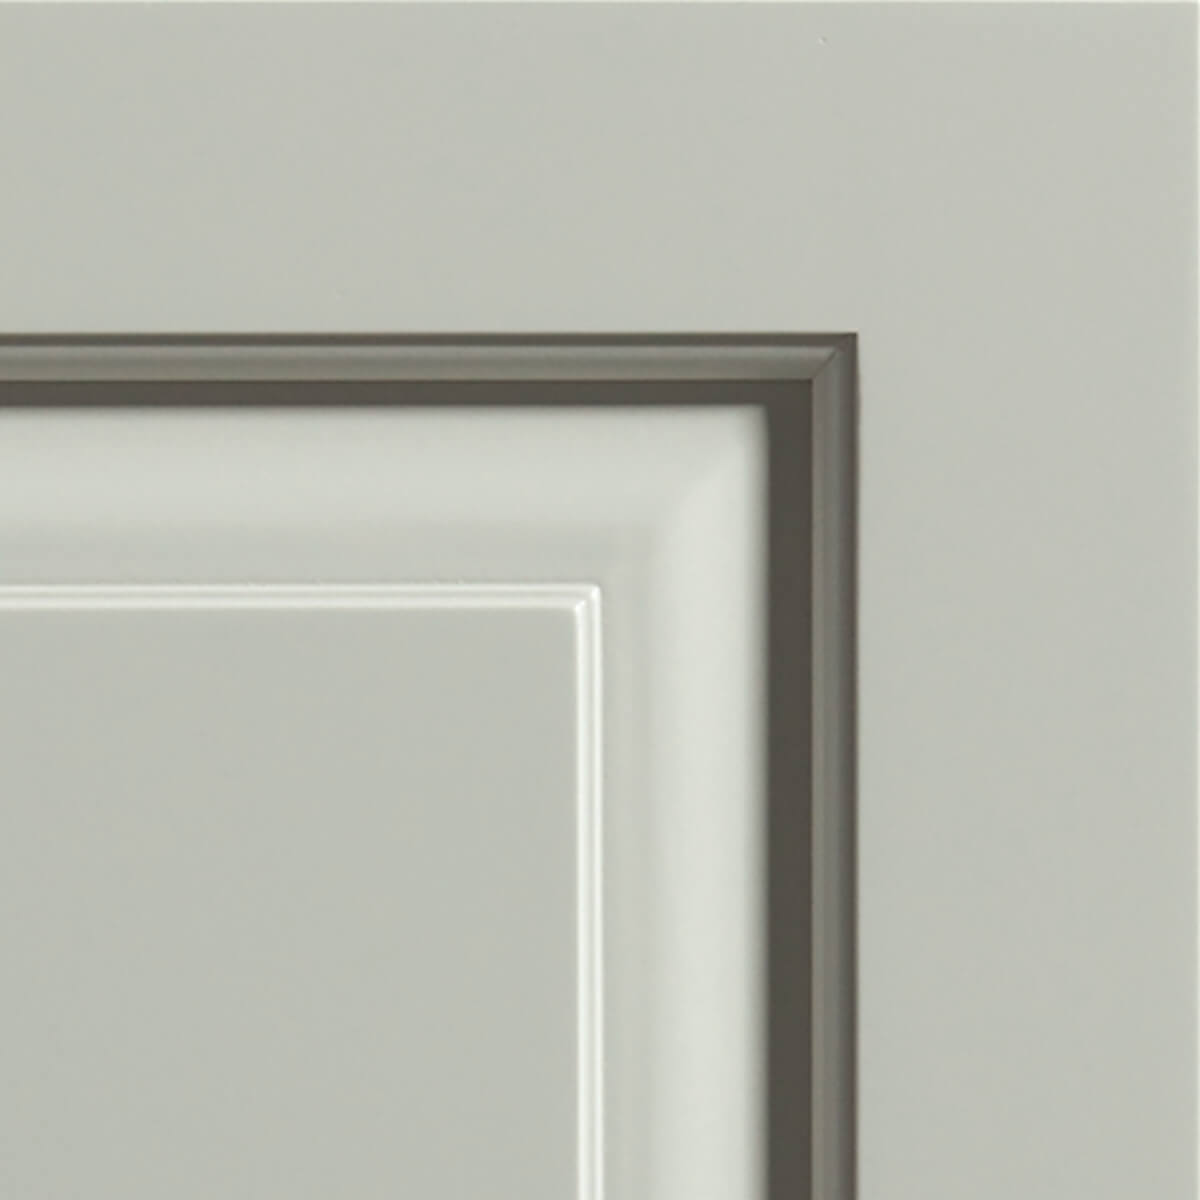 Moonstone paint by Dura Supreme in the Kendall door style.